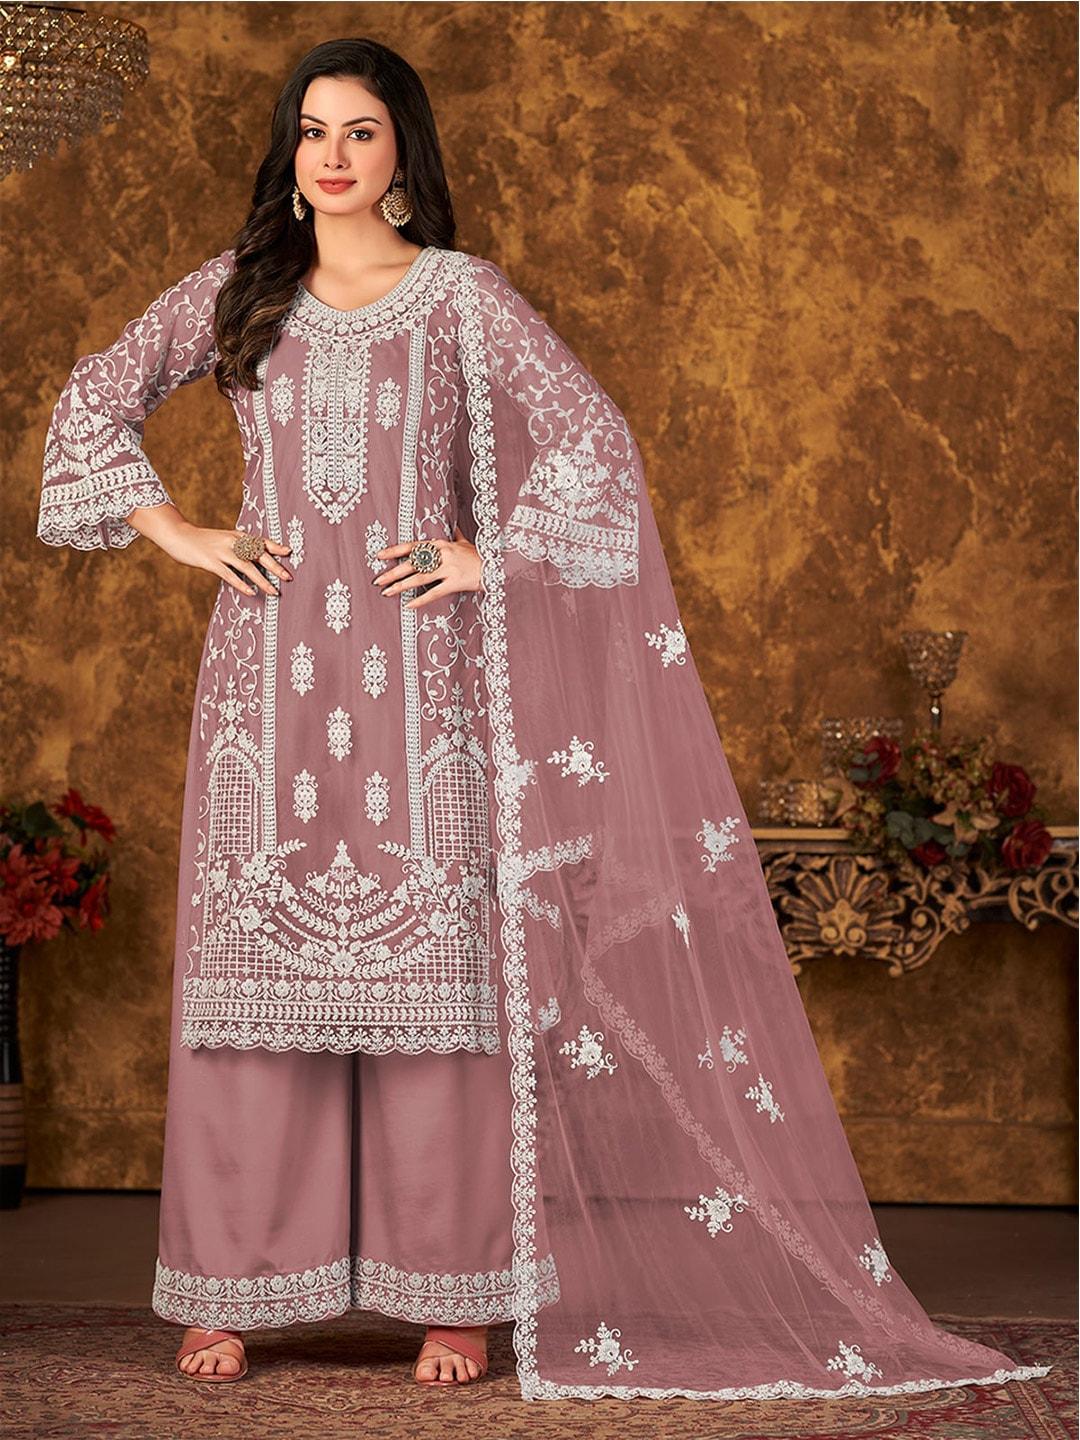 ODETTE Ethnic Motifs Embroidered Thread Work Detailed Net Semi-Stitched Dress Material